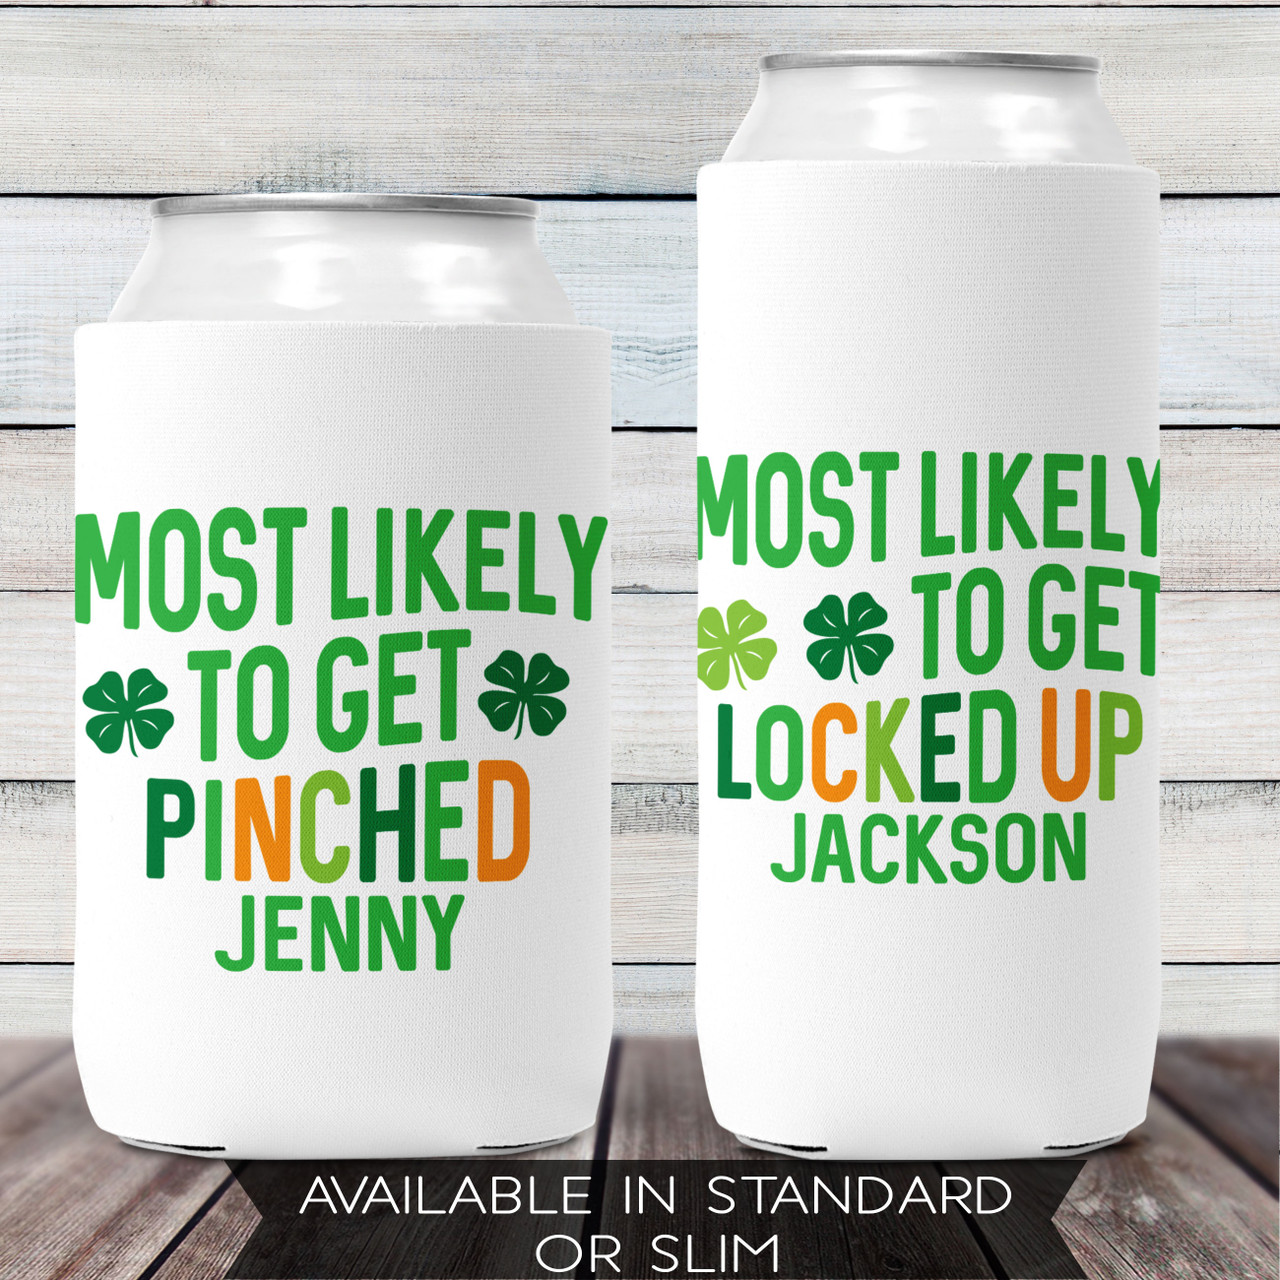 https://cdn11.bigcommerce.com/s-5grzuu6/images/stencil/1280w/products/6542/53471/St-Patricks-Day-Most-Likely-To_Custom_Can-Coolers__35279.1677863946.jpg